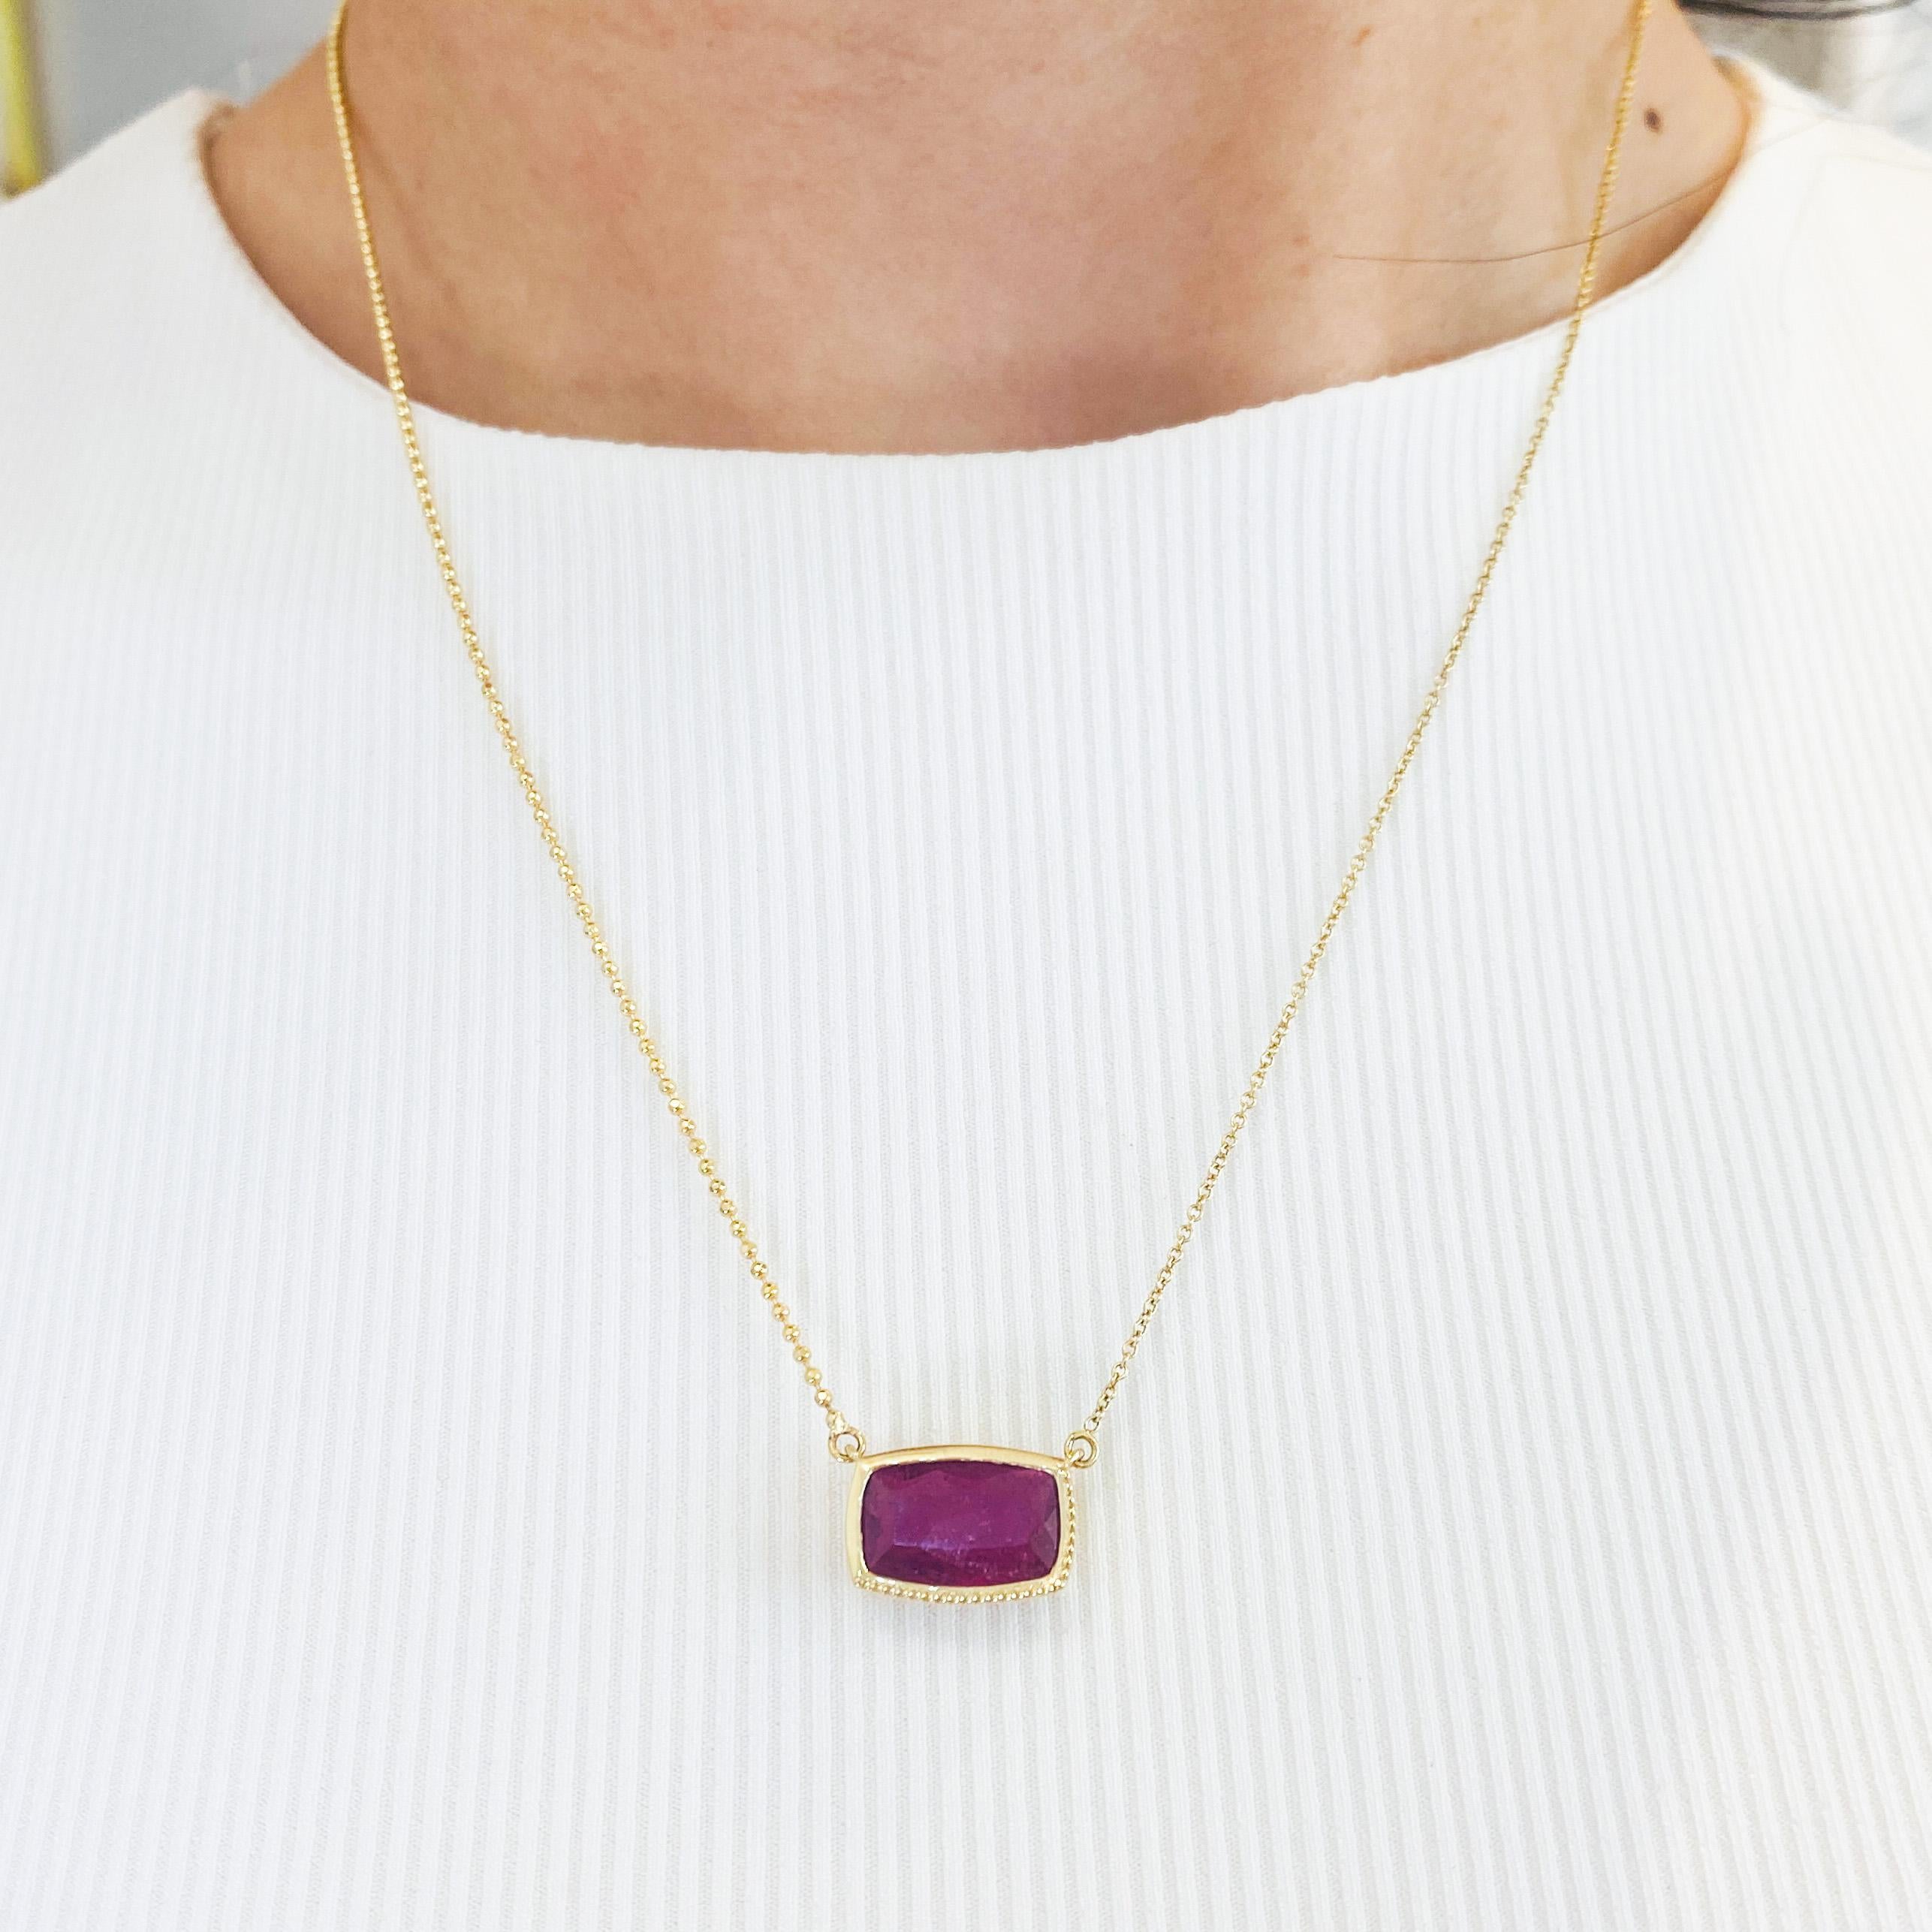 Celebrate yourself or a loved one with this pink tourmaline necklace... perfect for any birth, anniversary, graduation, or milestone! The rounded rectangular pink tourmaline has the same rich deep color and shimmer as a vibrantly blooming fuchsia